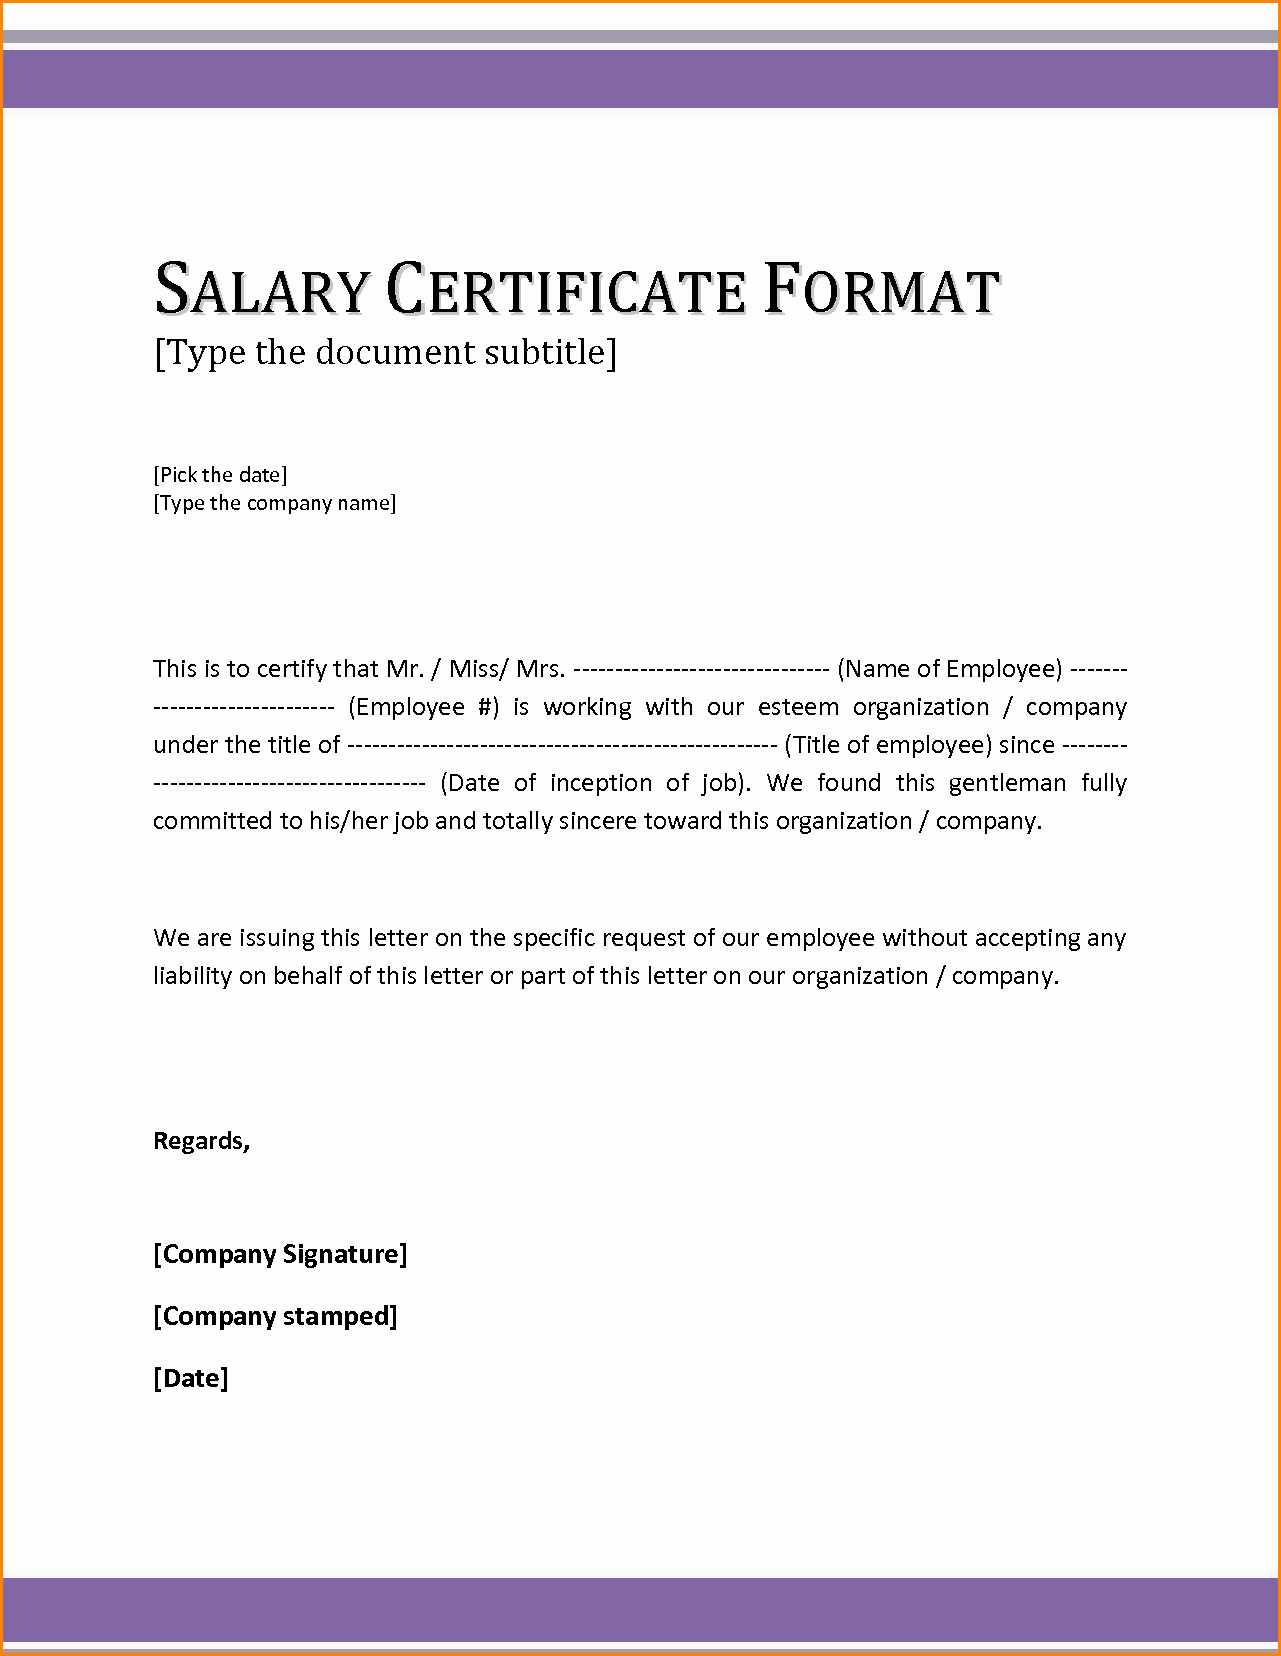 Sample Certificate Of Employment Luxury 6 Sample Of Certificate Of Employment with Salary